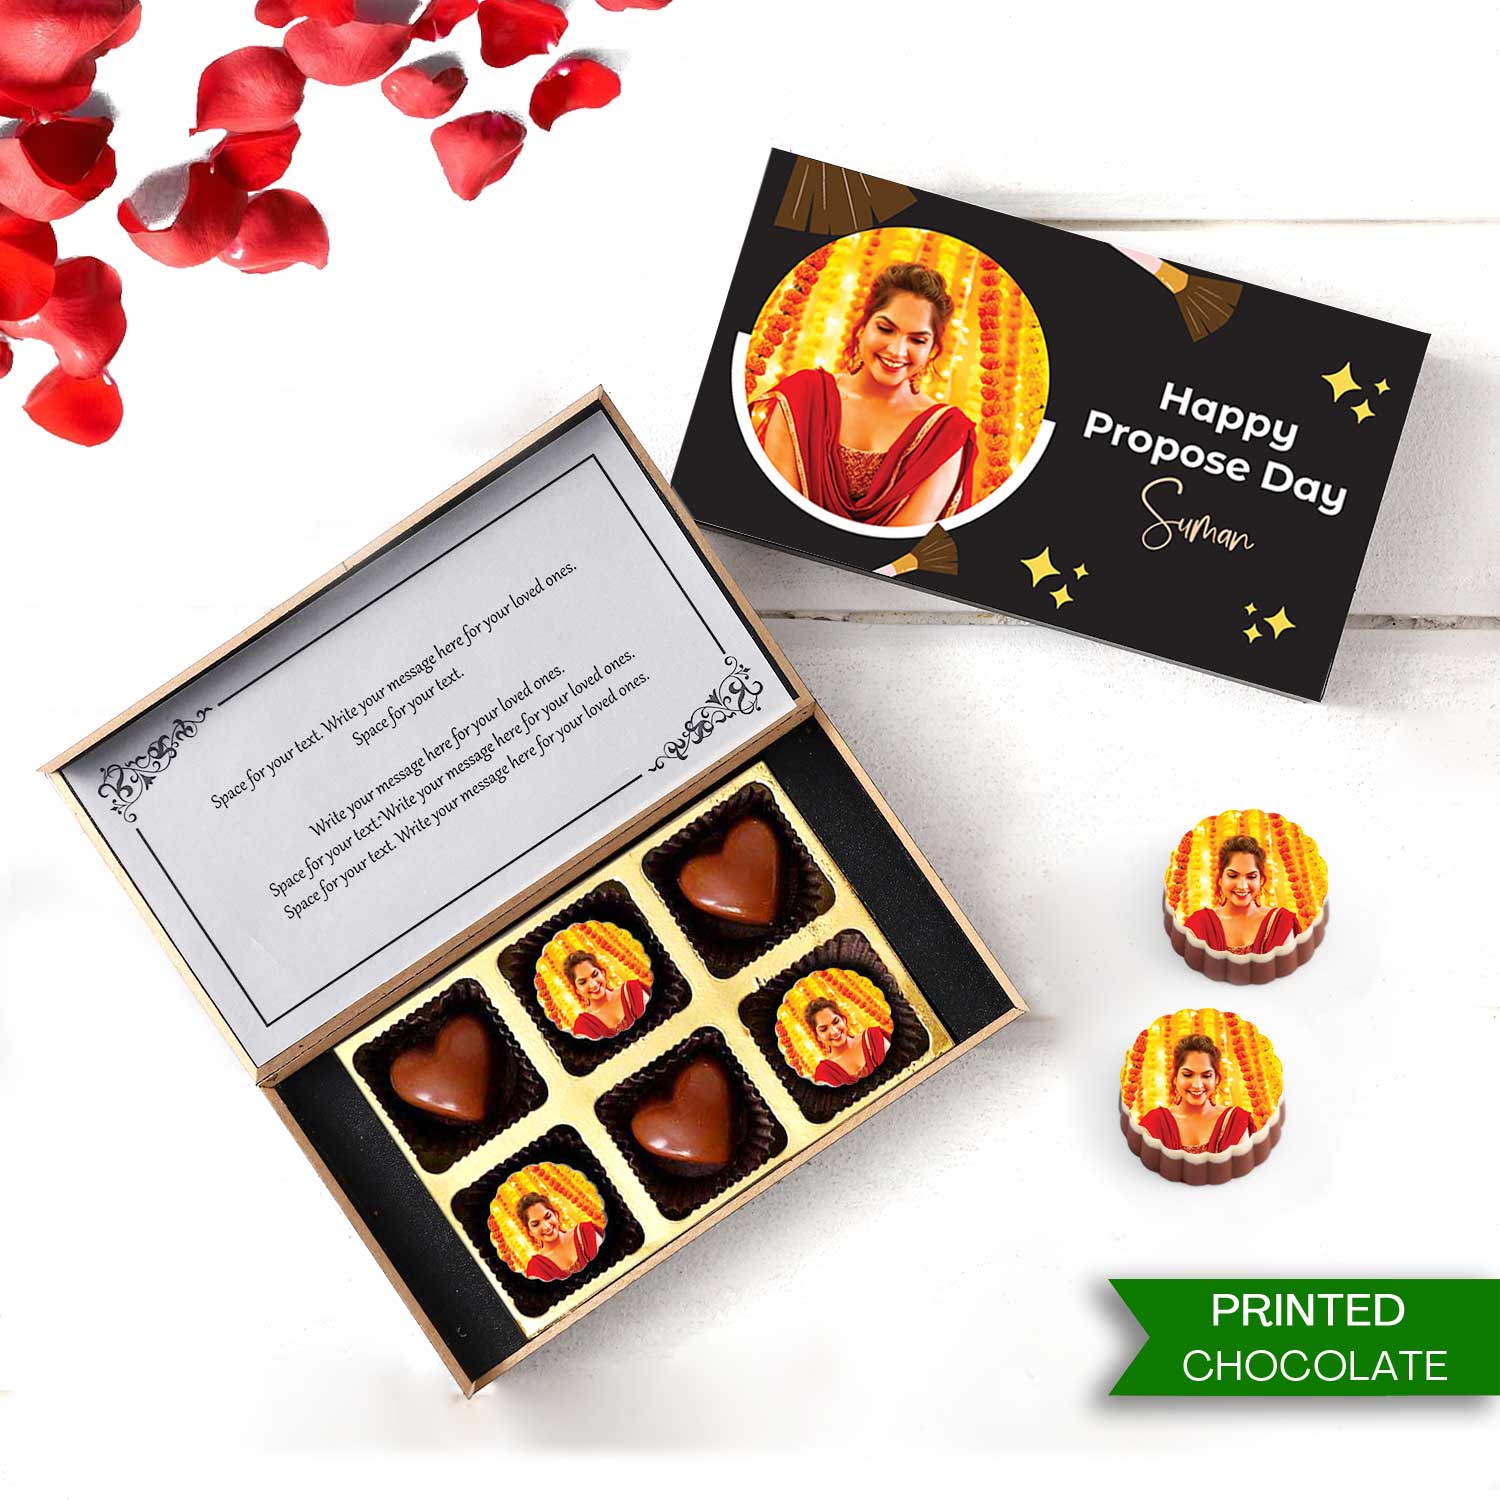 Customised Chocolate gift for Propose Day